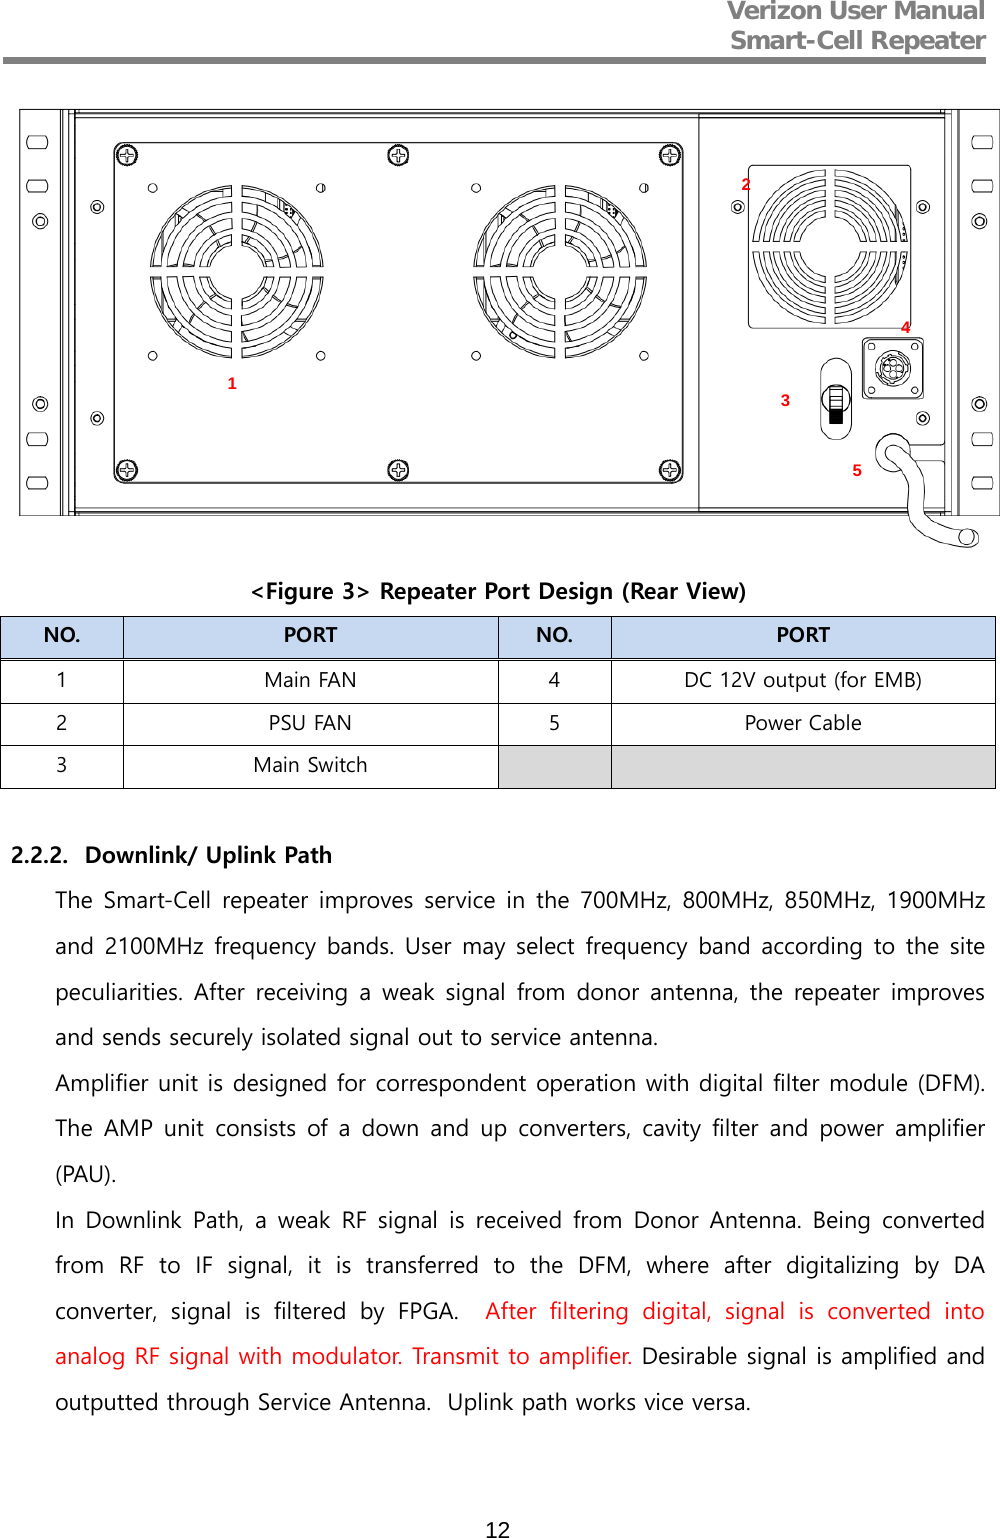 Verizon User Manual  Smart-Cell Repeater   12  &lt;Figure 3&gt; Repeater Port Design (Rear View) NO. PORT NO. PORT 1  Main FAN  4  DC 12V output (for EMB) 2  PSU FAN  5  Power Cable 3  Main Switch      2.2.2. Downlink/ Uplink Path The Smart-Cell repeater improves service in the 700MHz, 800MHz, 850MHz, 1900MHz and 2100MHz frequency bands. User may select frequency band according to the site peculiarities. After receiving a weak signal from donor antenna, the repeater improves and sends securely isolated signal out to service antenna. Amplifier unit is designed for correspondent operation with digital filter module (DFM). The AMP unit consists of a down and up converters, cavity filter and power amplifier (PAU). In Downlink Path, a weak RF signal is received from Donor Antenna. Being converted from RF to IF signal, it is transferred to the DFM, where after digitalizing by DA converter, signal is filtered by FPGA.  After filtering digital, signal is converted into analog RF signal with modulator. Transmit to amplifier. Desirable signal is amplified and outputted through Service Antenna.  Uplink path works vice versa.  1 2 3 5 4 